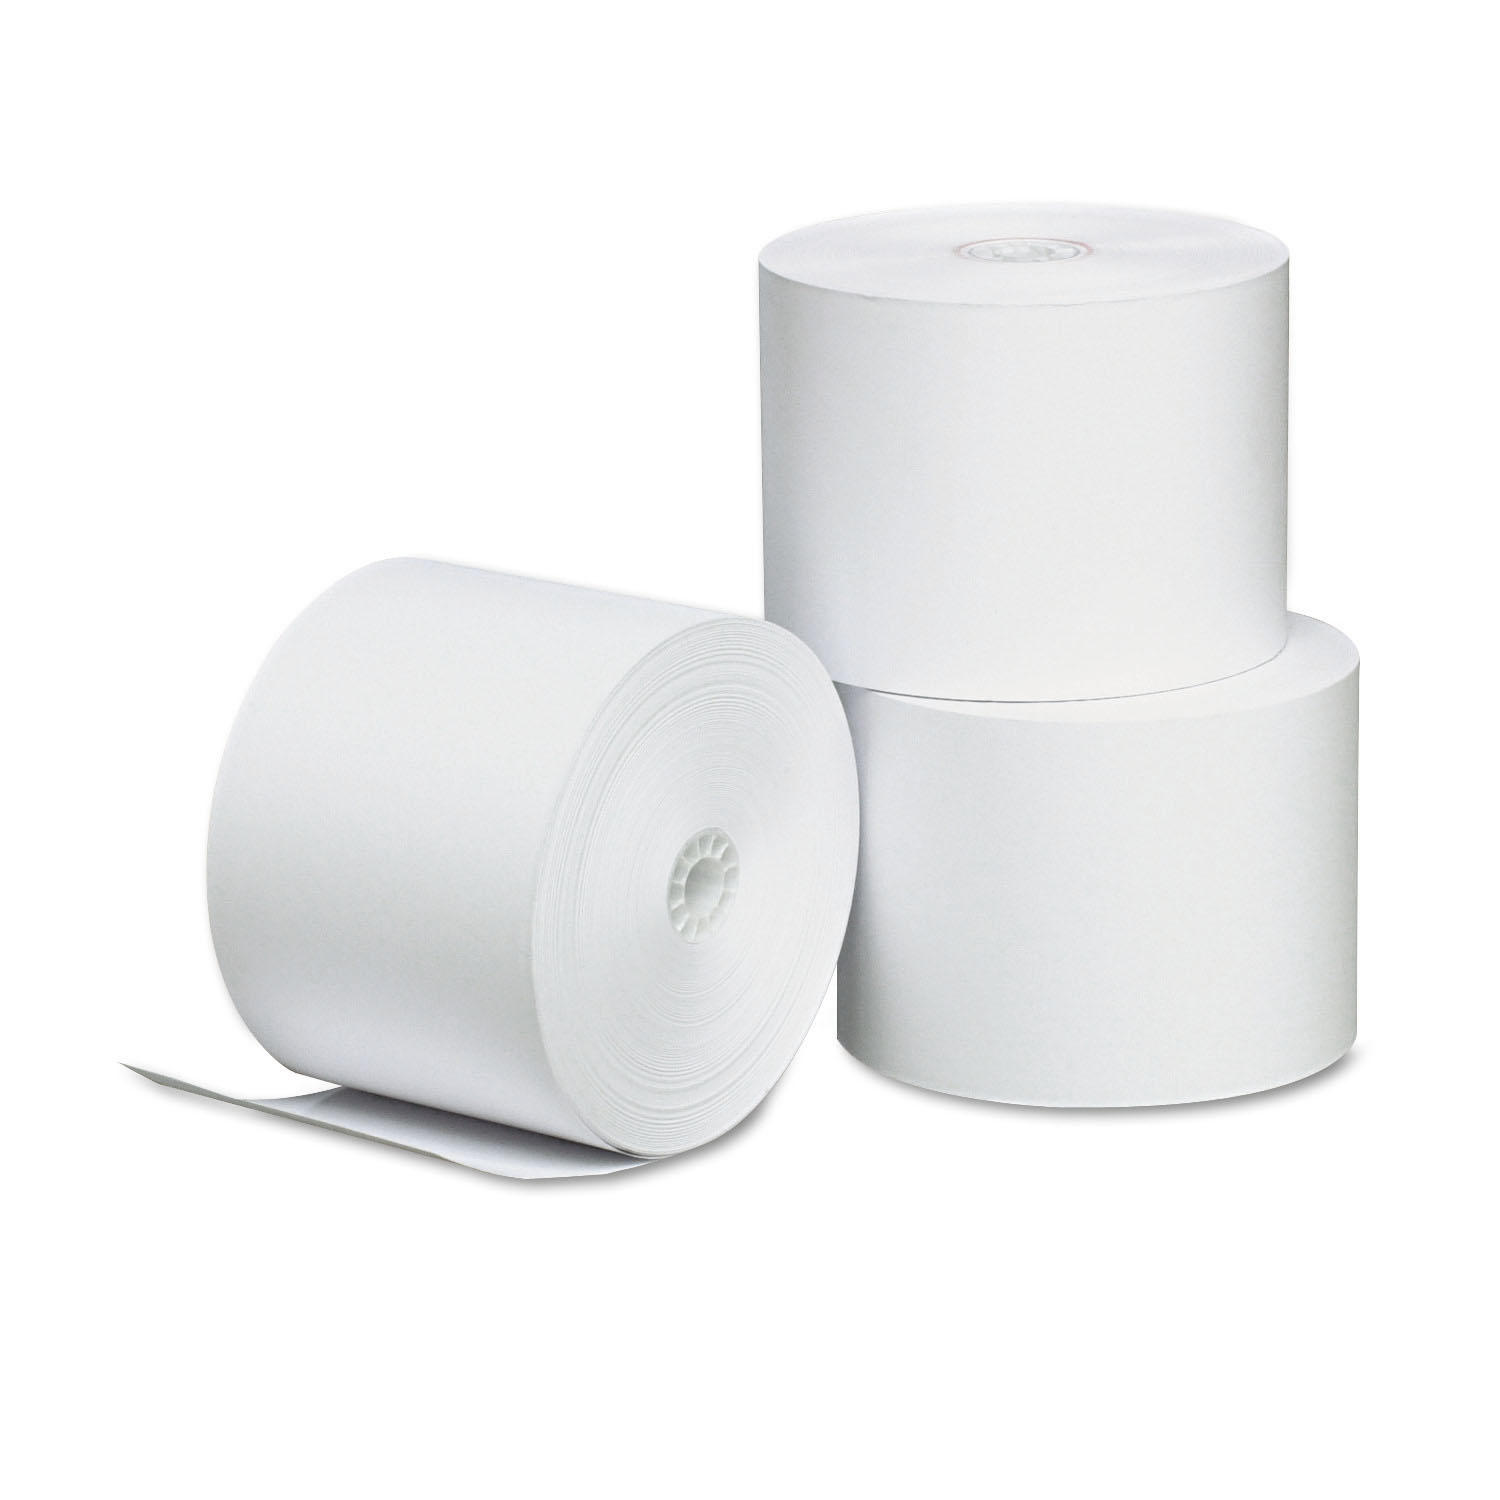 Single-Ply Thermal Paper Rolls, 2 1/4" x 165 ft, White, 3/Pack